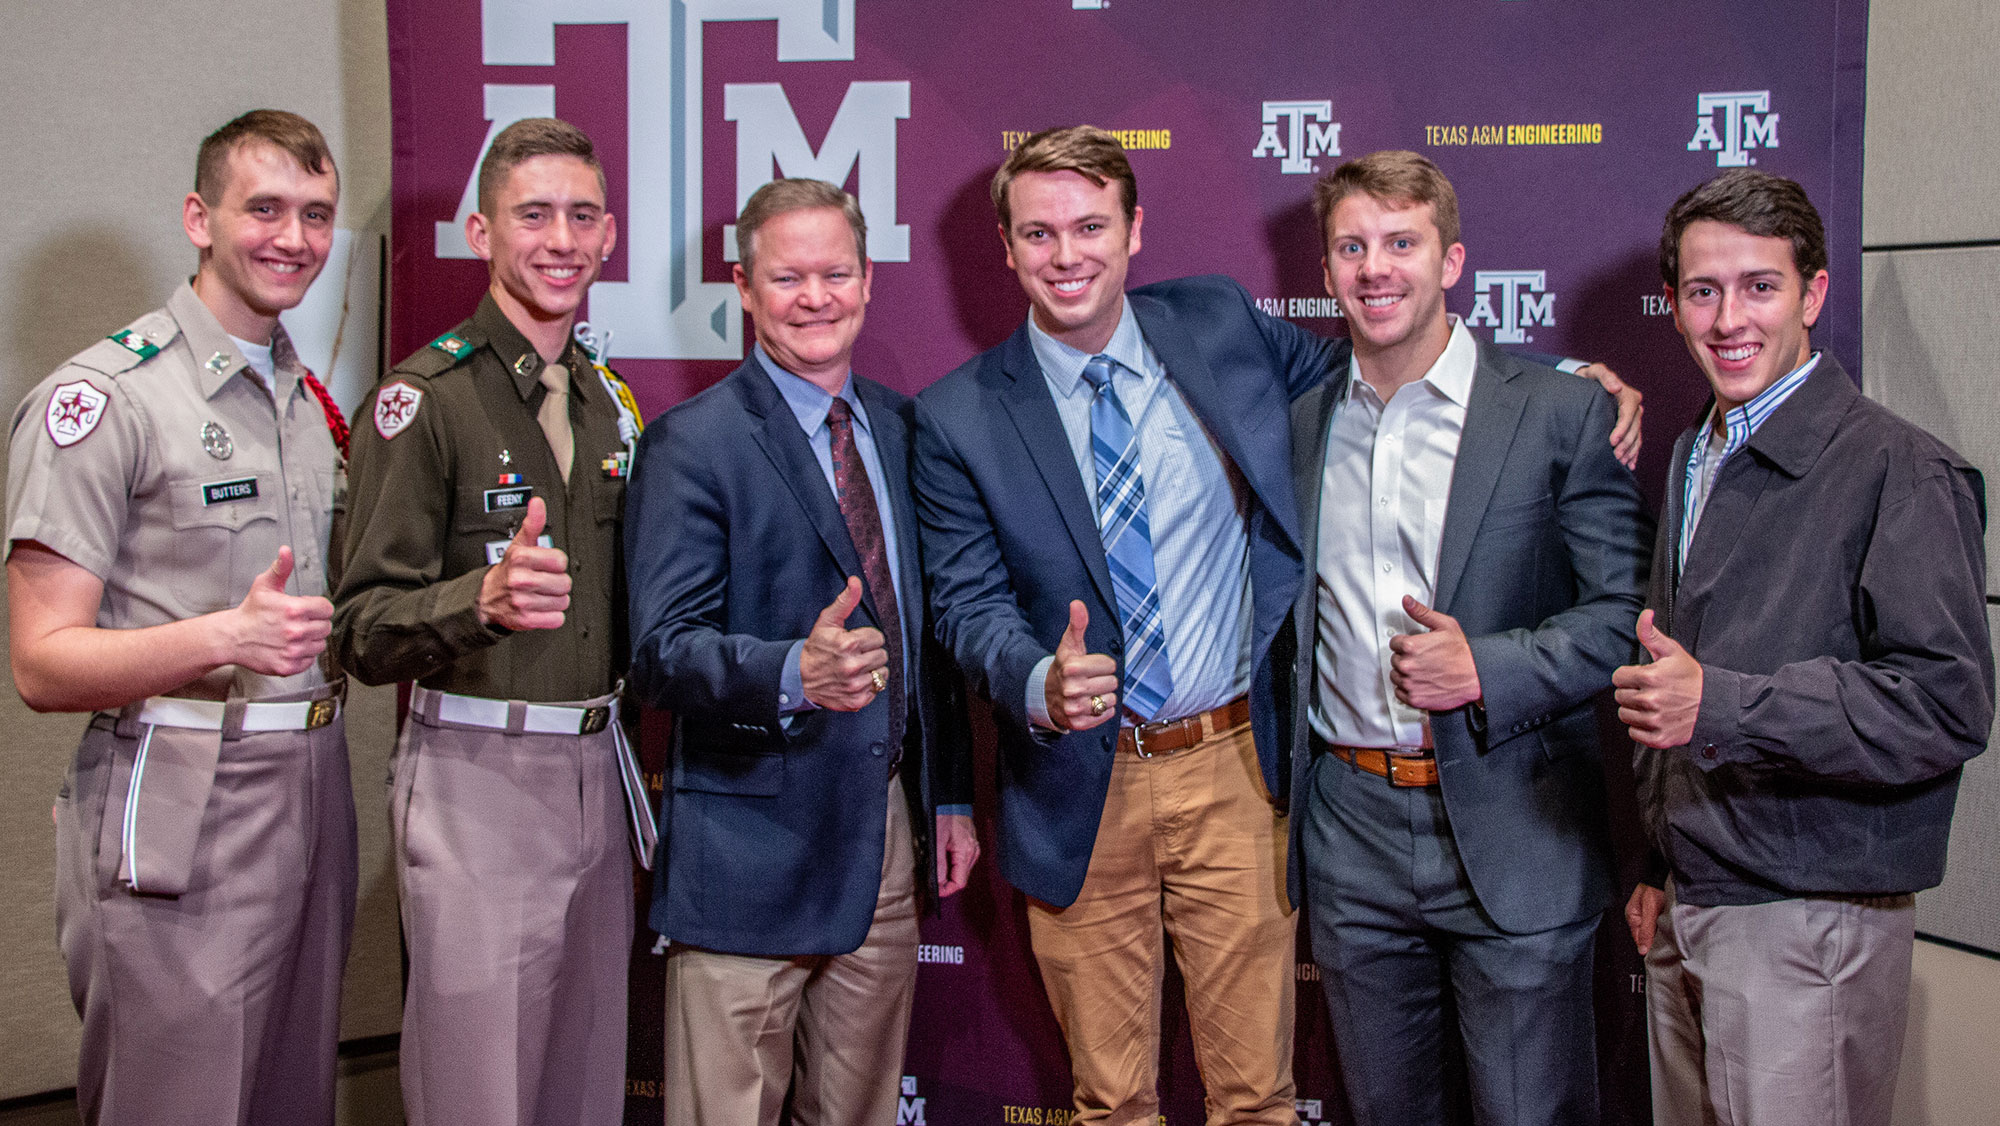 Scott Moses with Texas A&M Engineering students